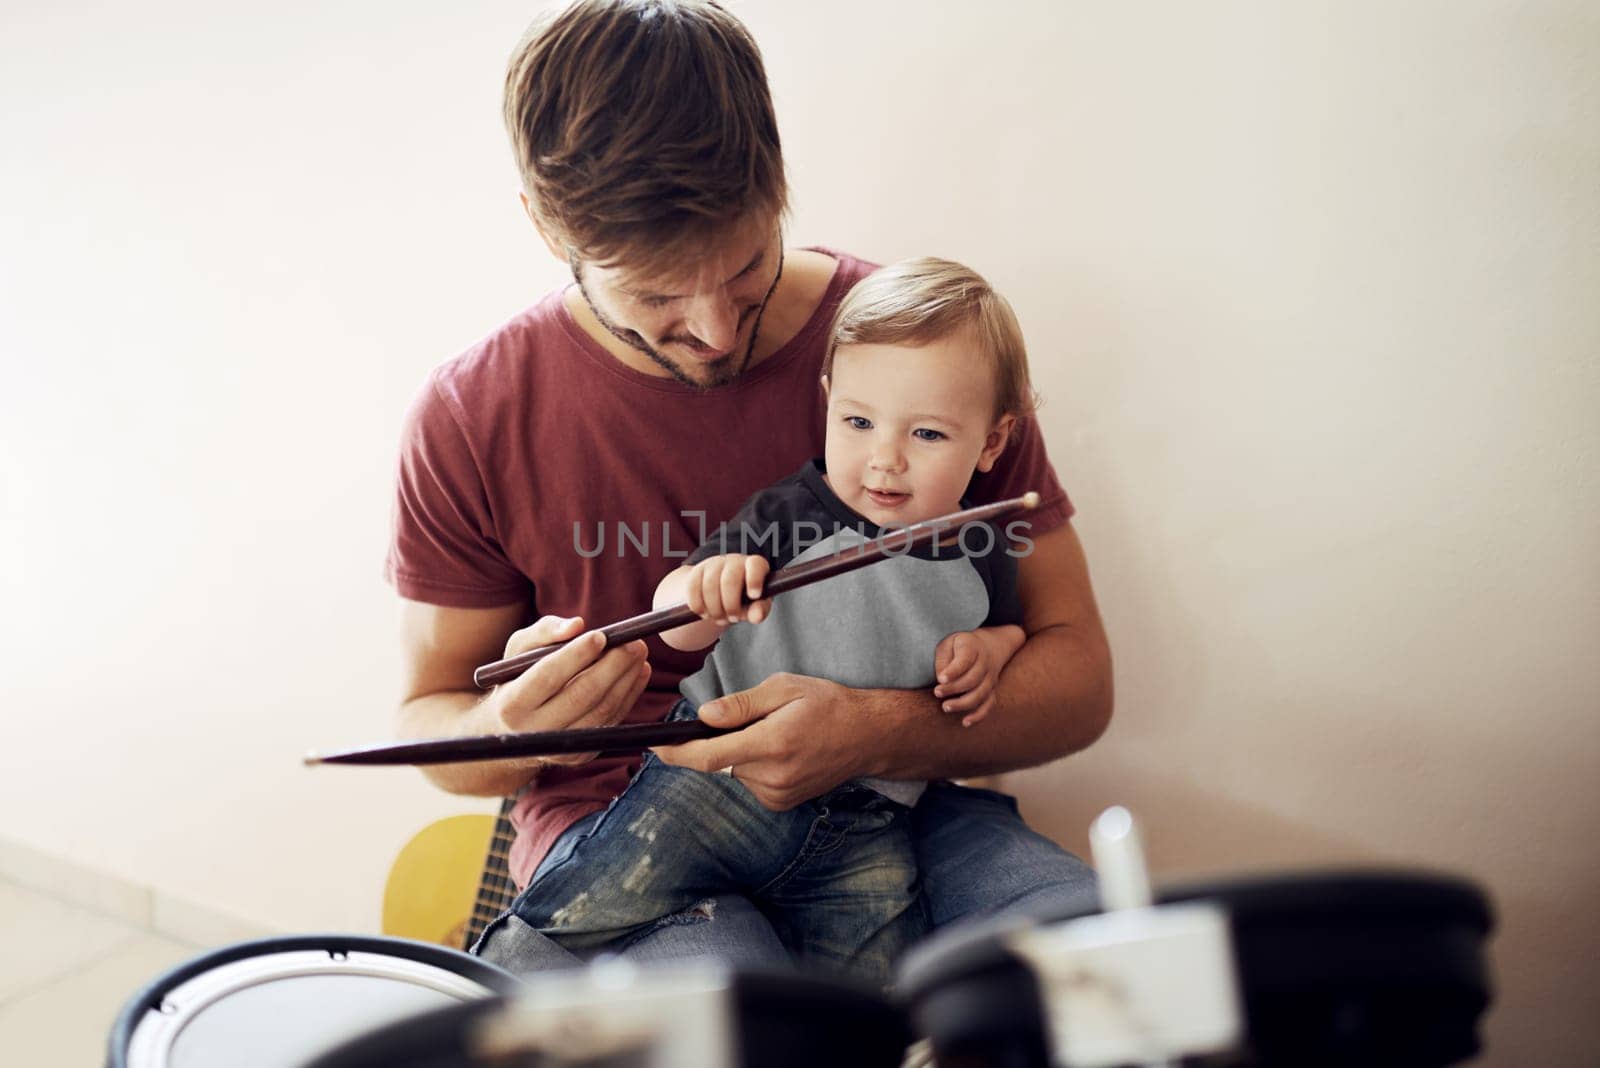 Happy father, baby and child drum lesson with music development and kids learning. Home, happiness and bonding with youth and dad together with a smile, instrument and parent care at a family house.